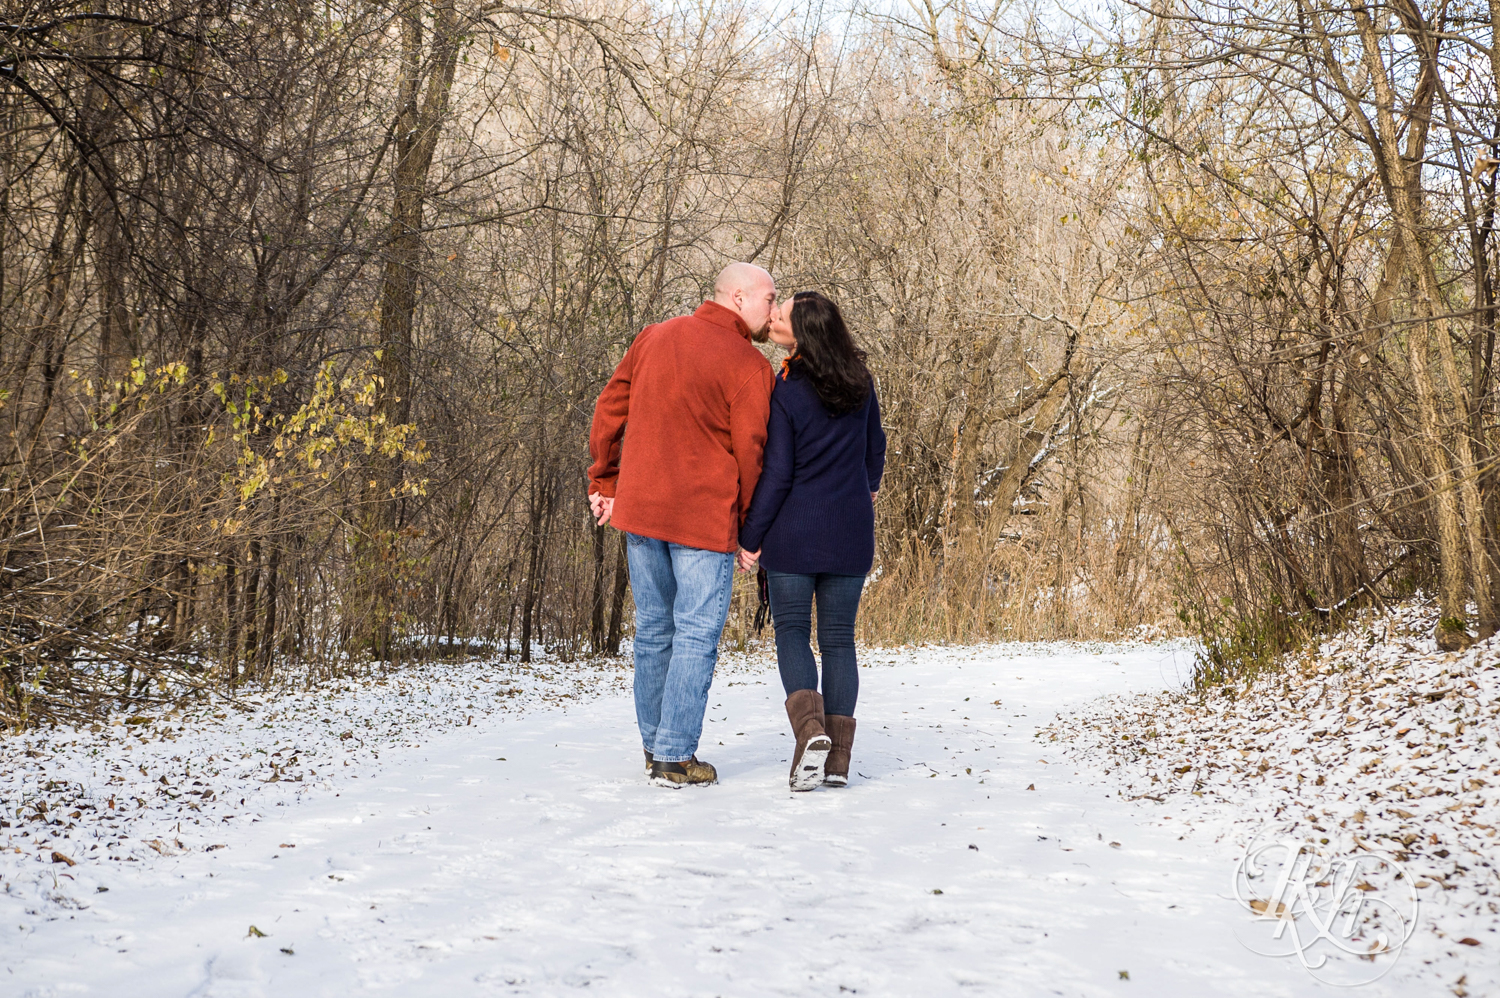 Man and woman kiss while walking in snow in Hidden Valley Park in Savage, Minnesota.